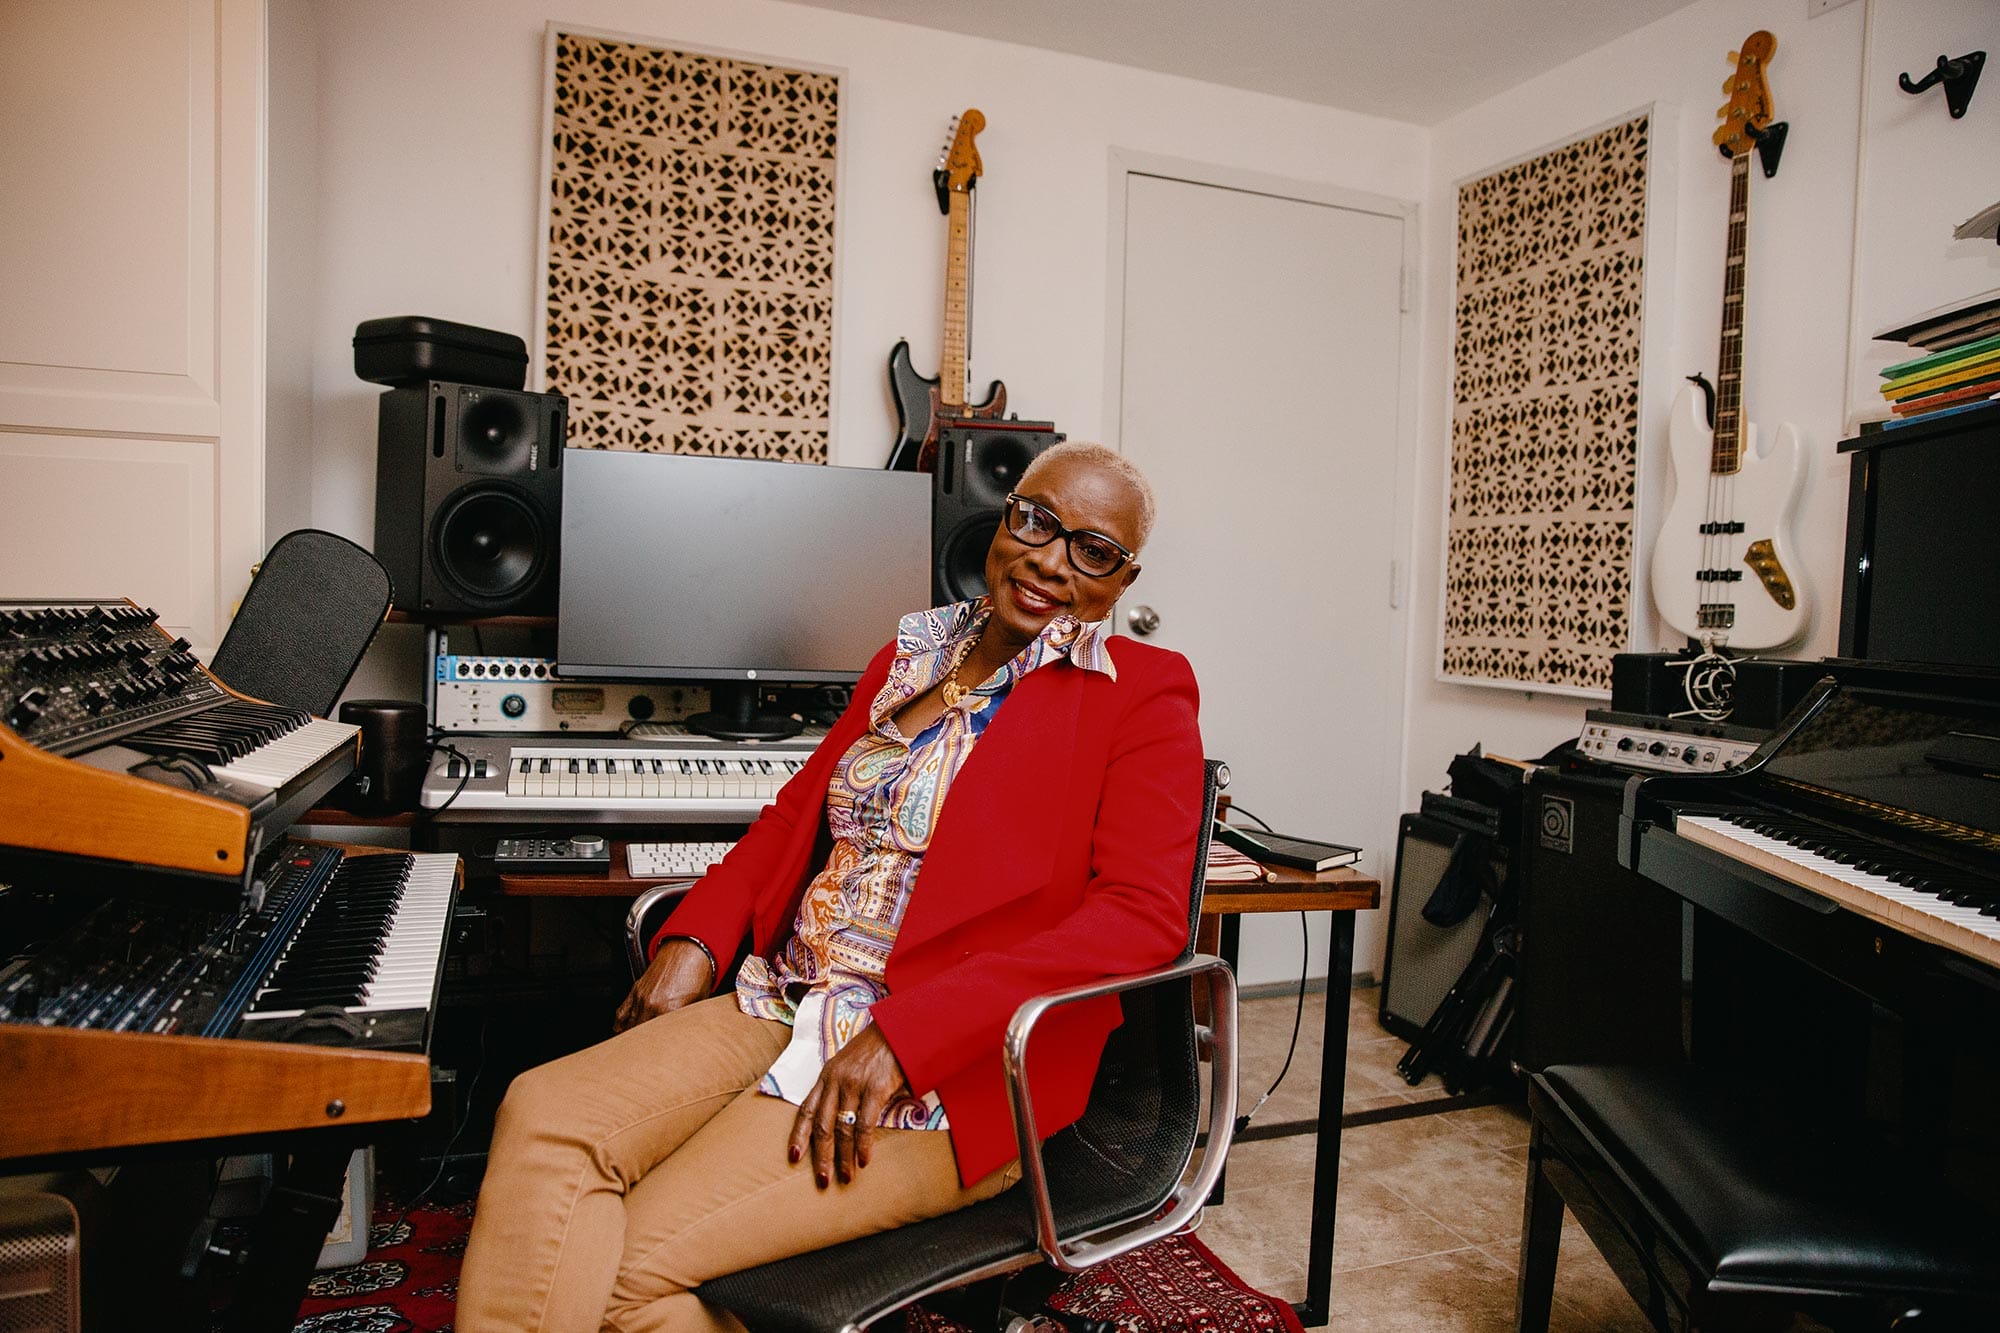 Angélique Kidjo sitting at a studio desk with musical equipment.